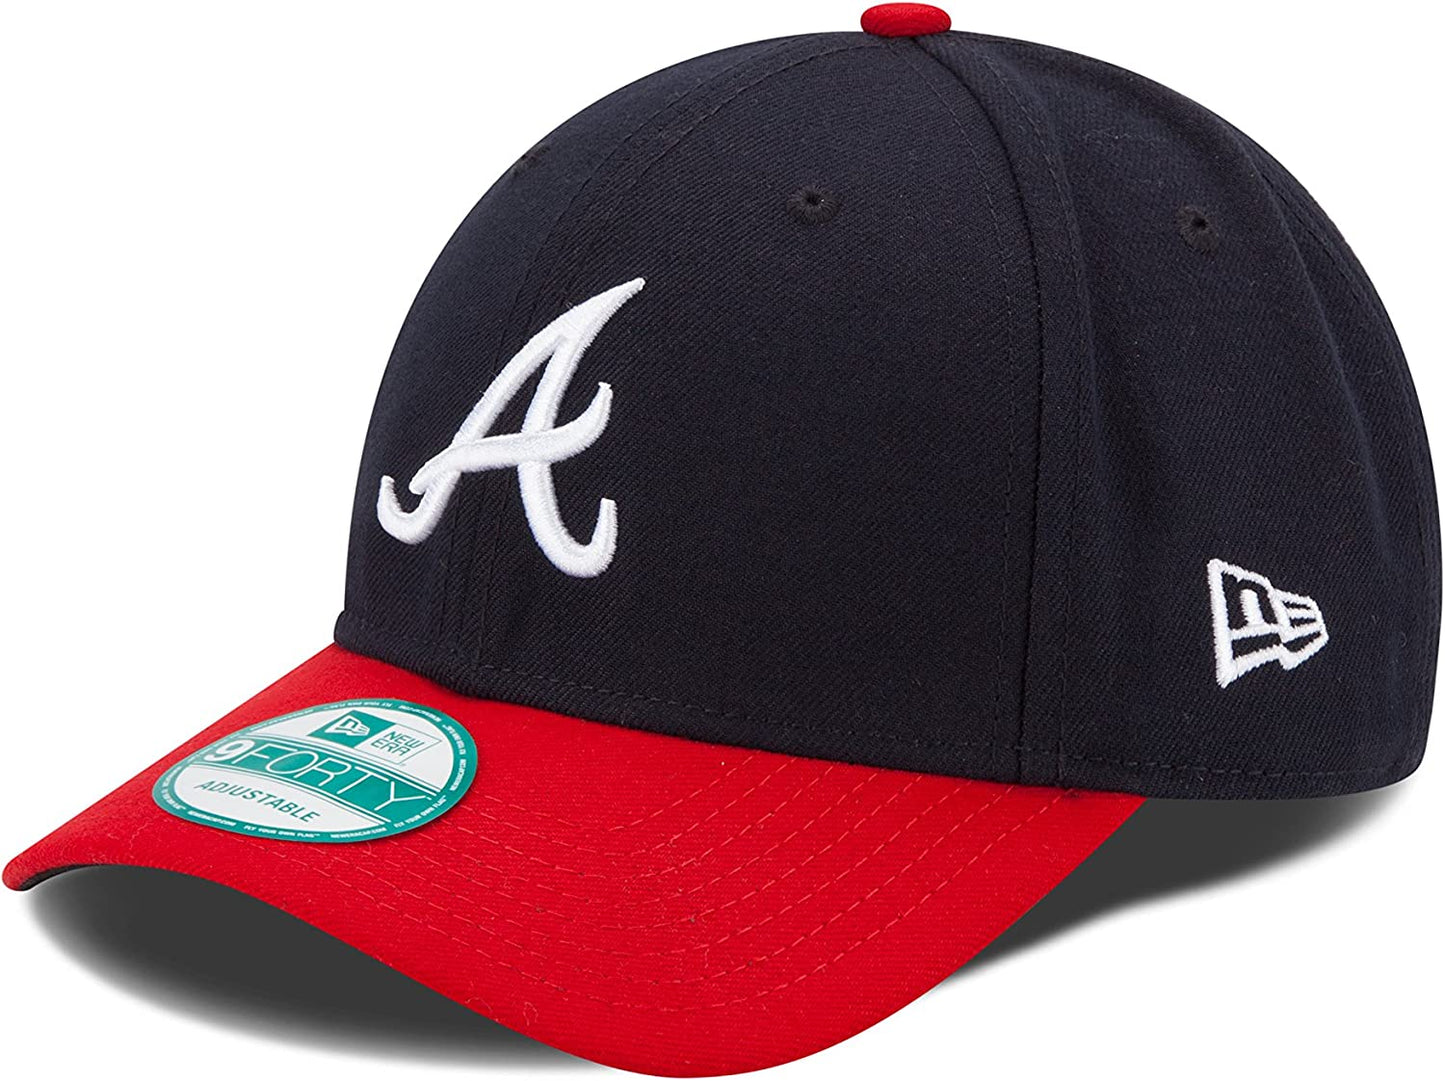 Youth Atlanta Braves New Era MLB The League Navy/Red 9FORTY Adjustable Cap